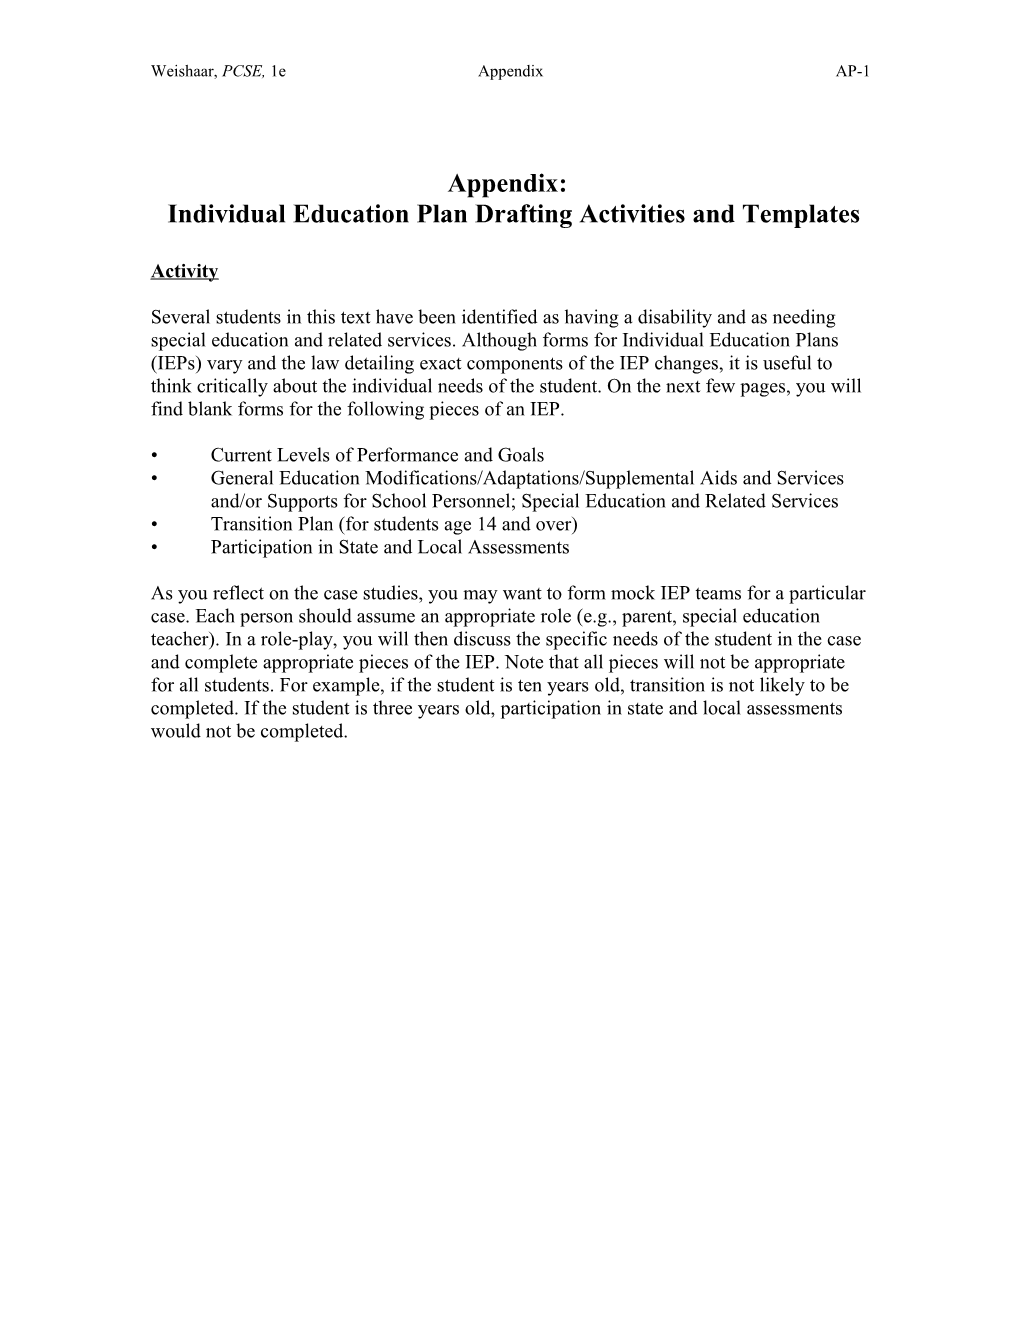 Appendix B Optional Activity Referral for Special Education And/Or Individual Education Plan